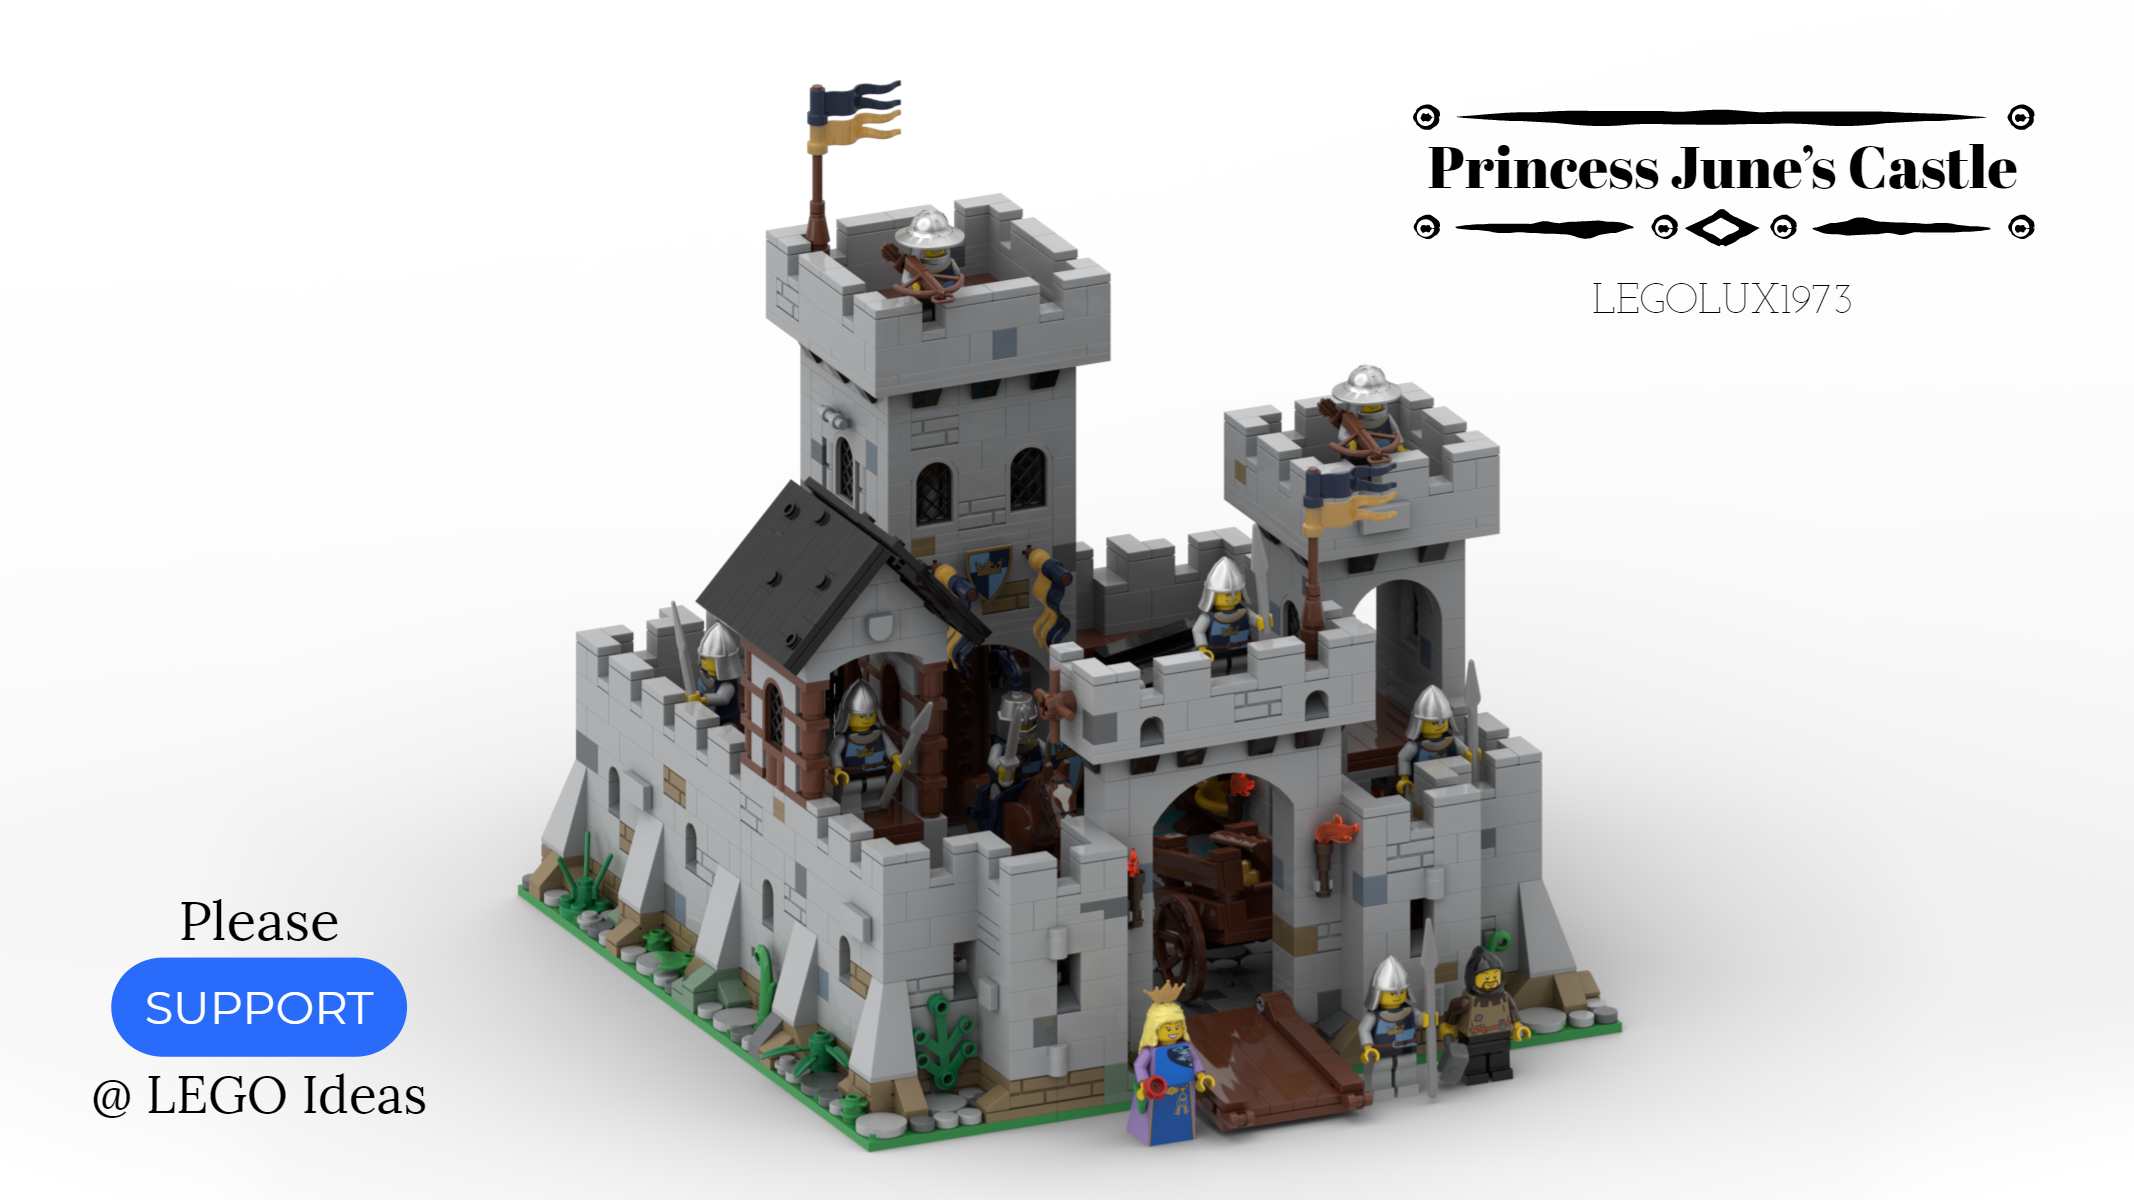 morder Støv Statistisk jm_aalen on Twitter: "My #lego Castle Project at #legoideas . A tribute to  my daughter June and to the famous Lego Yellow Castle. Would you like to  have this MOC as a